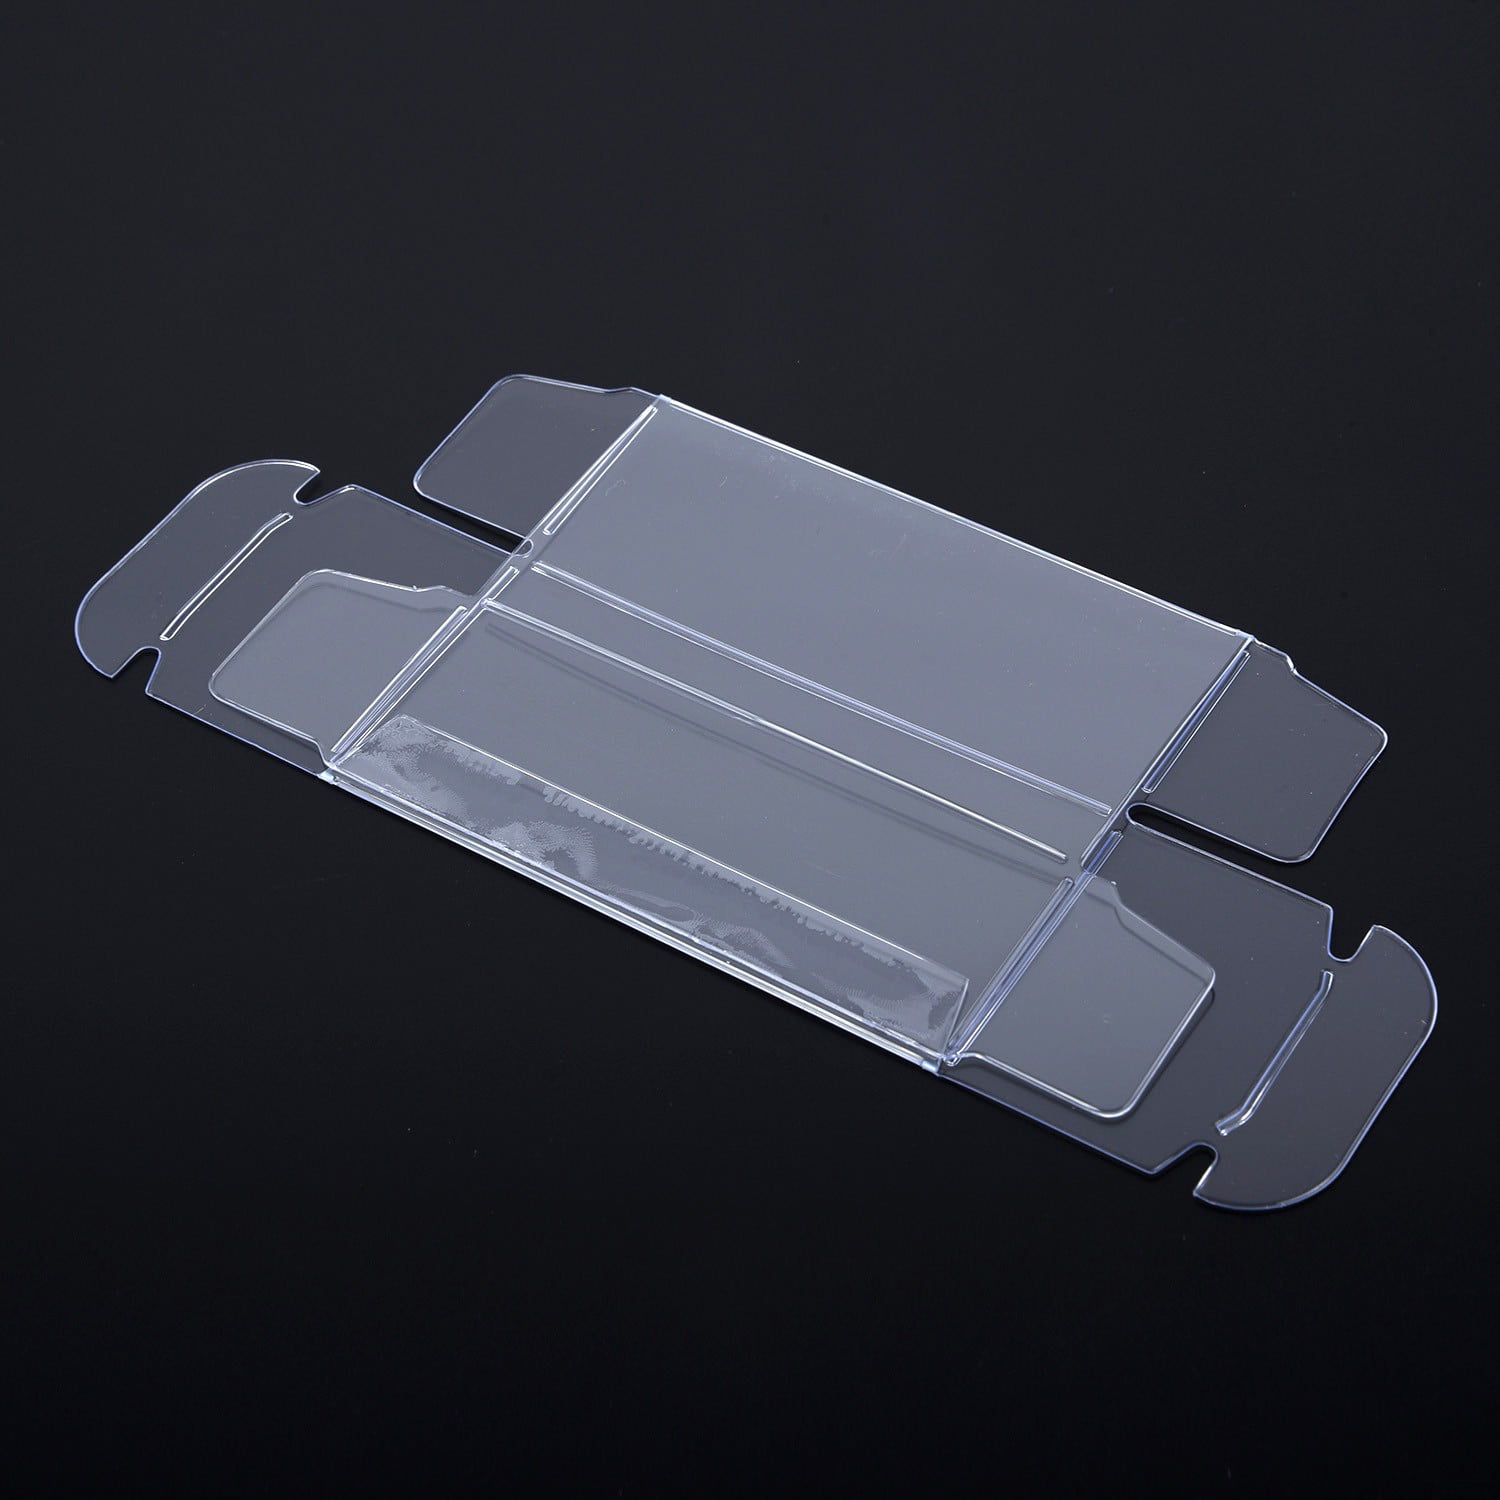 25Pcs 1:64 Clear PVC Display Box Protector Case For Diecast Model Car Toy 